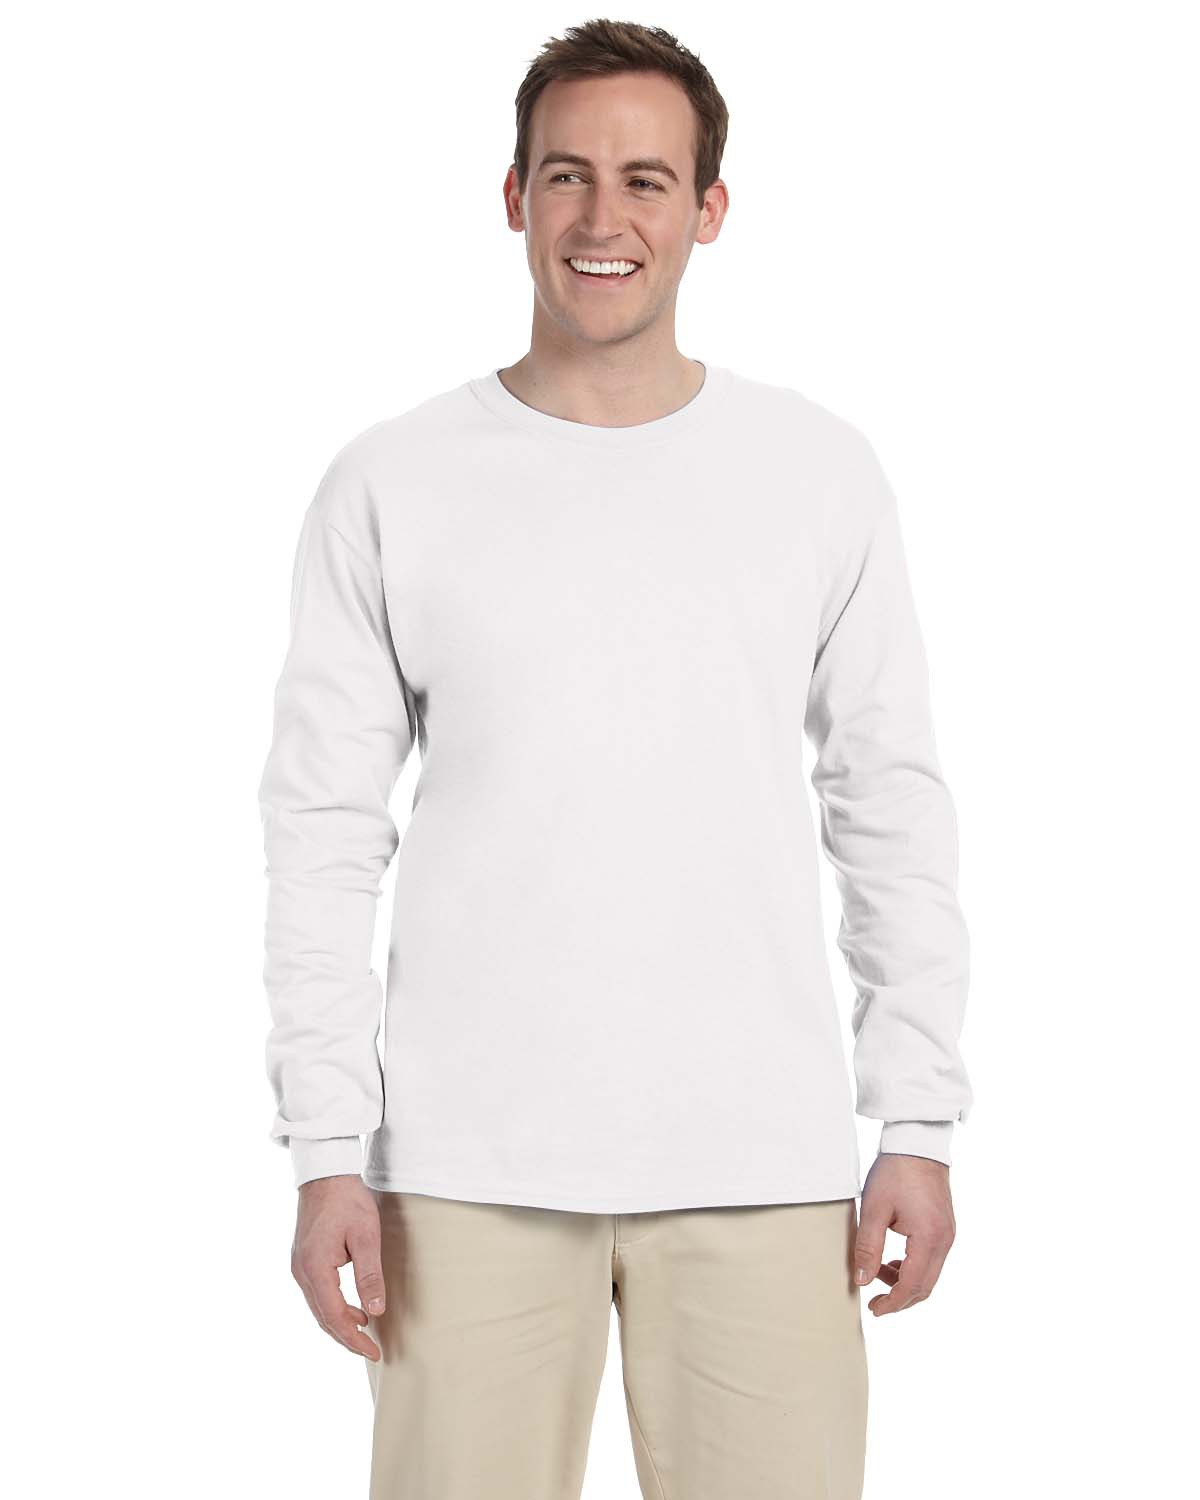 Fruit of the Loom Heavy Cotton Long-Sleeve T-Shirt 4930